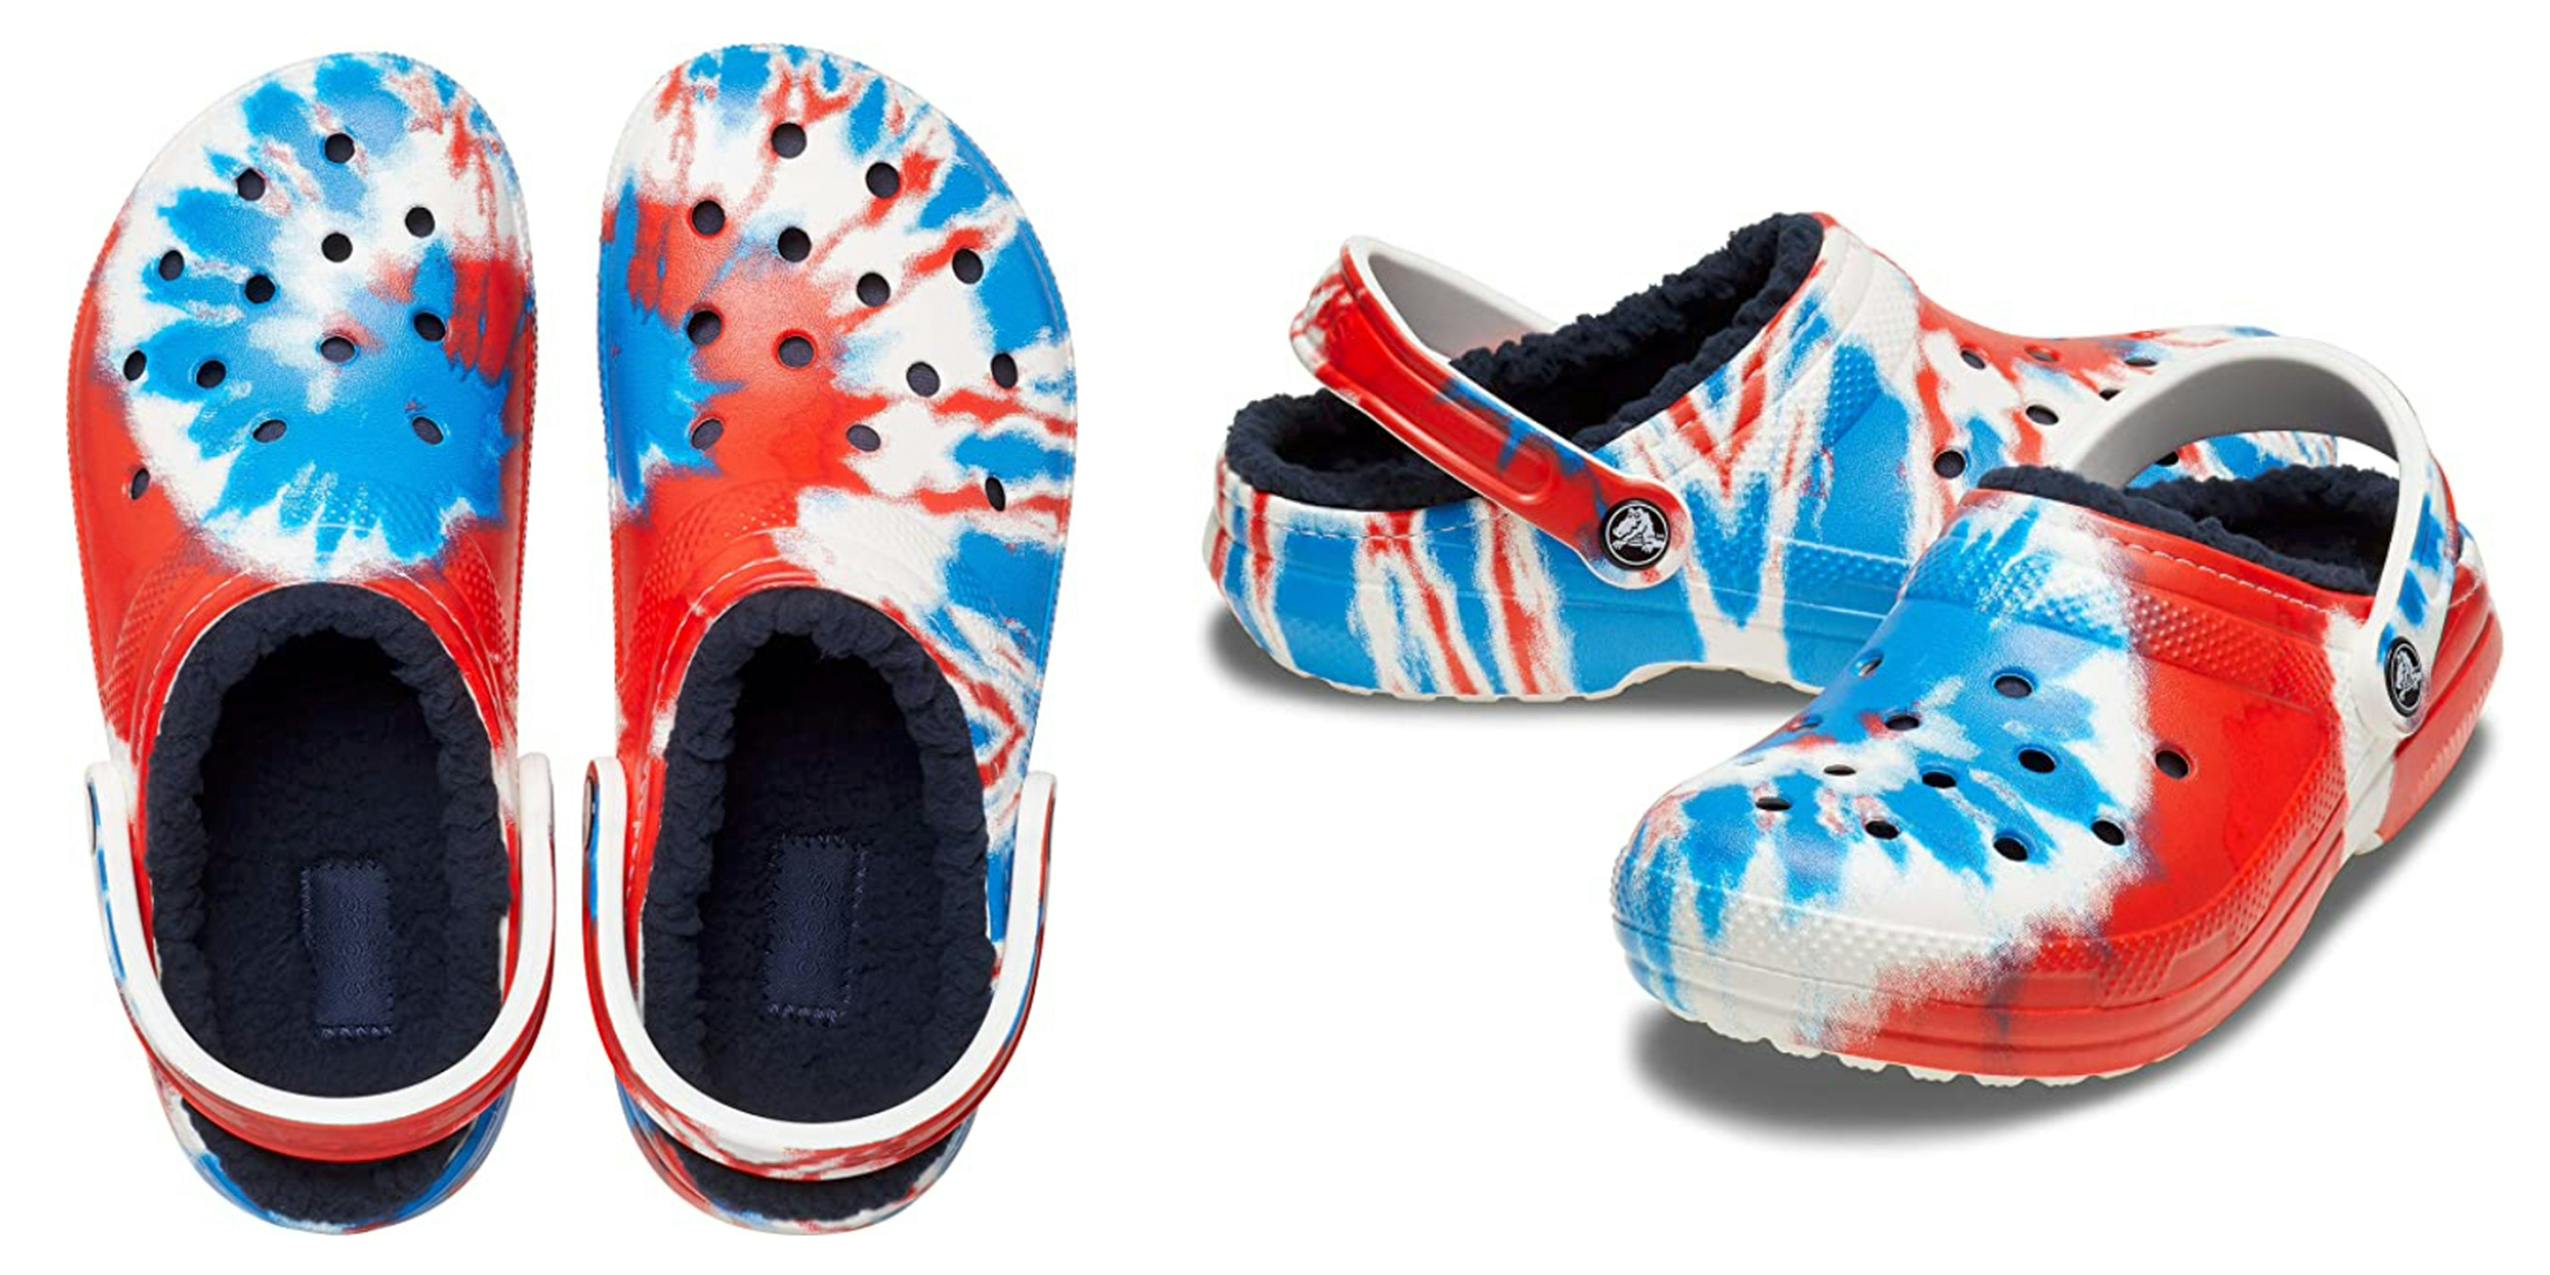 Warm and Fuzzy lining crocs show up in red, white and blue colors.